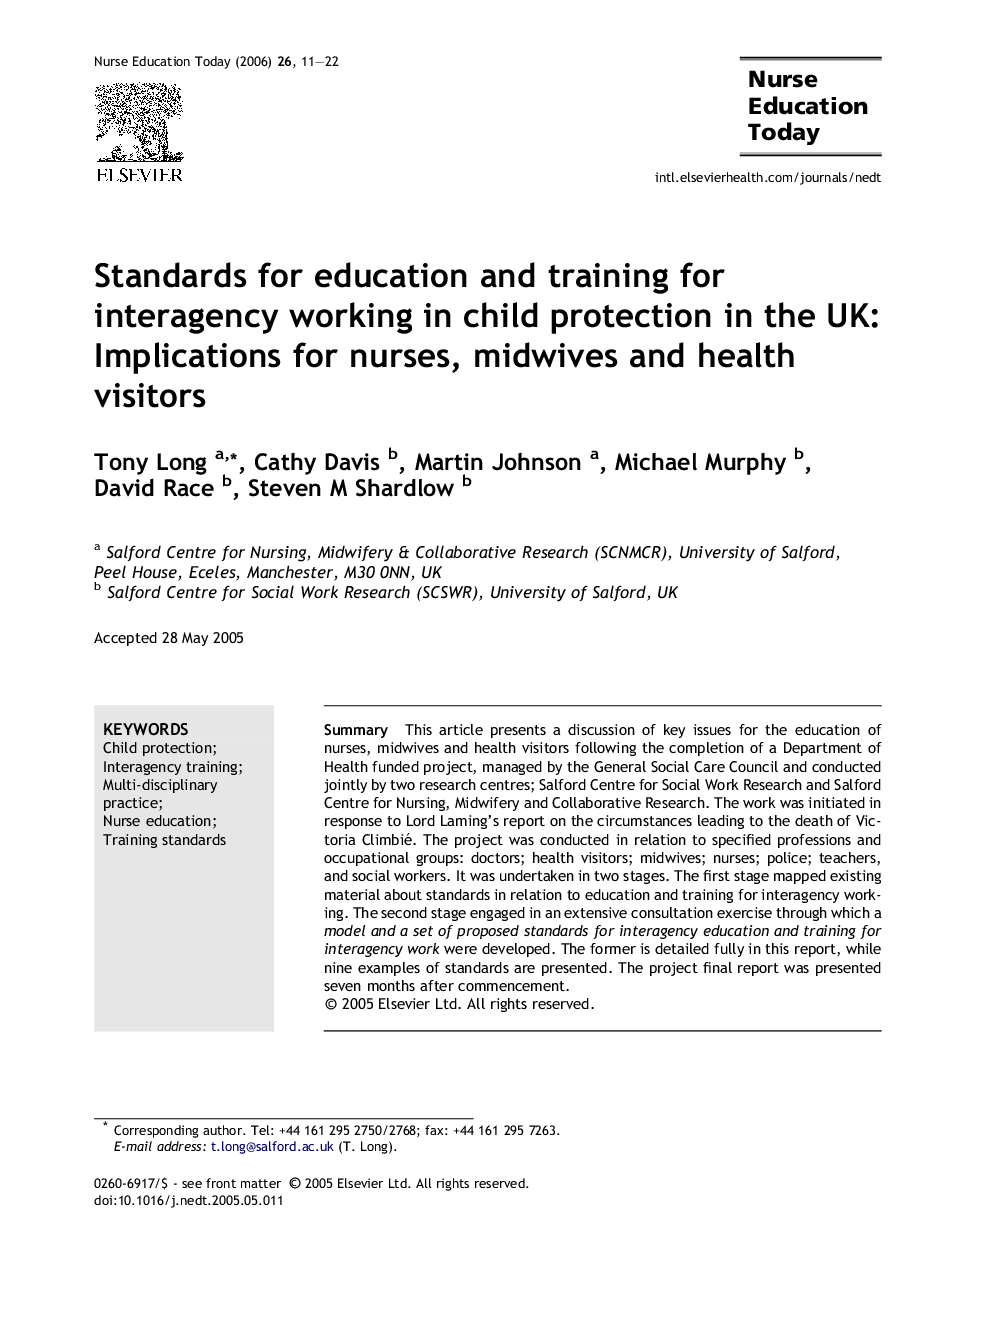 Standards for education and training for interagency working in child protection in the UK: Implications for nurses, midwives and health visitors